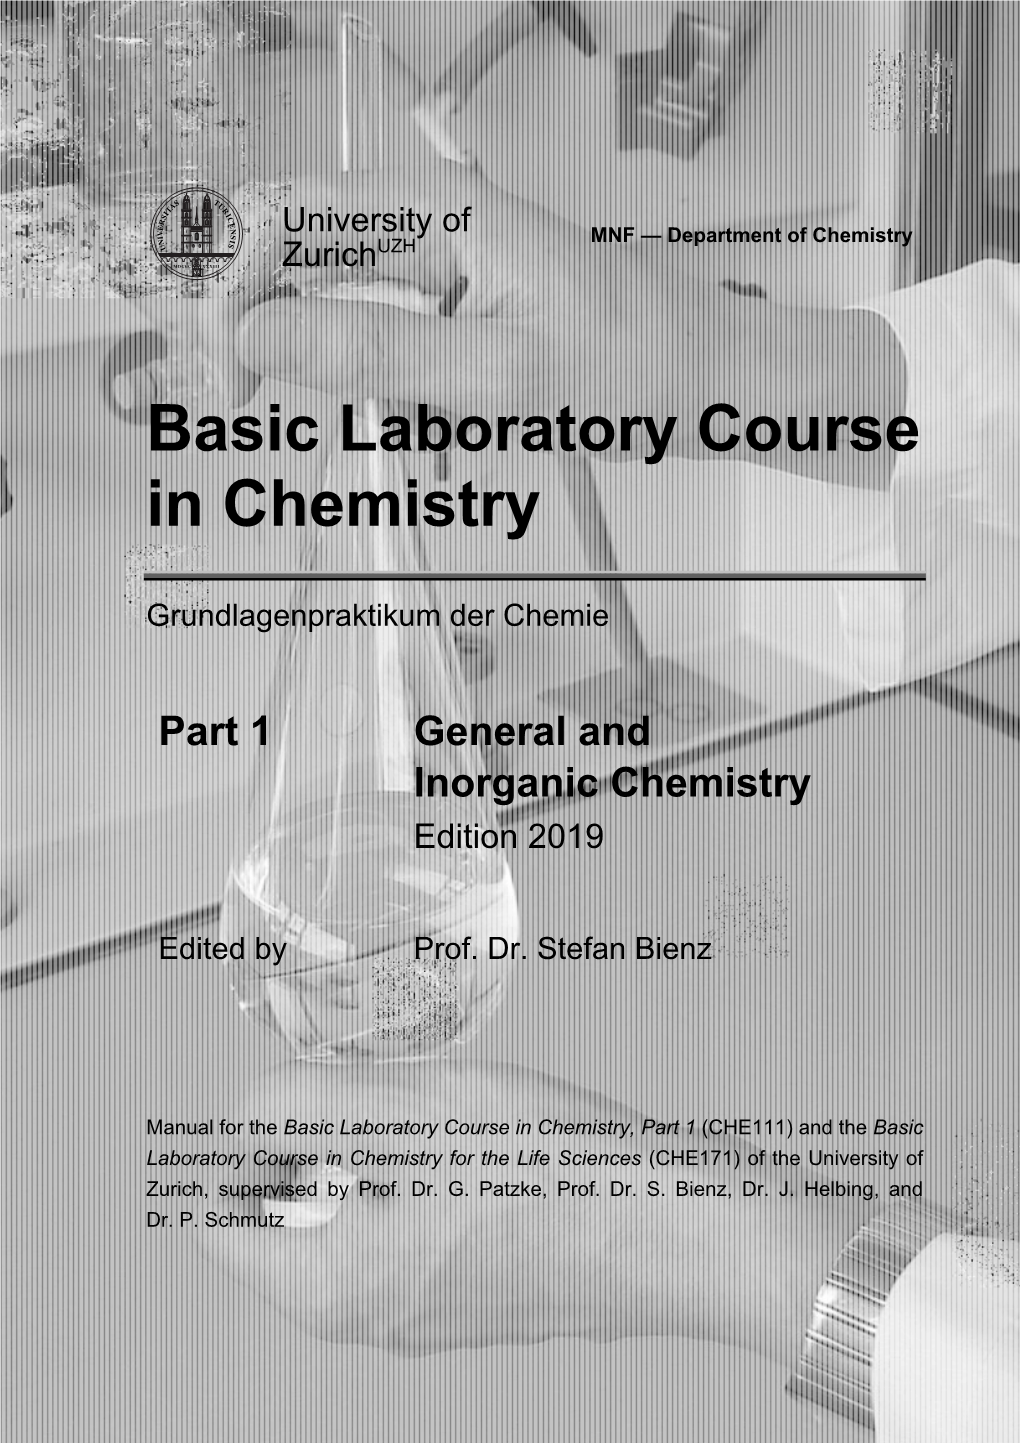 Basic Laboratory Course in Chemistry